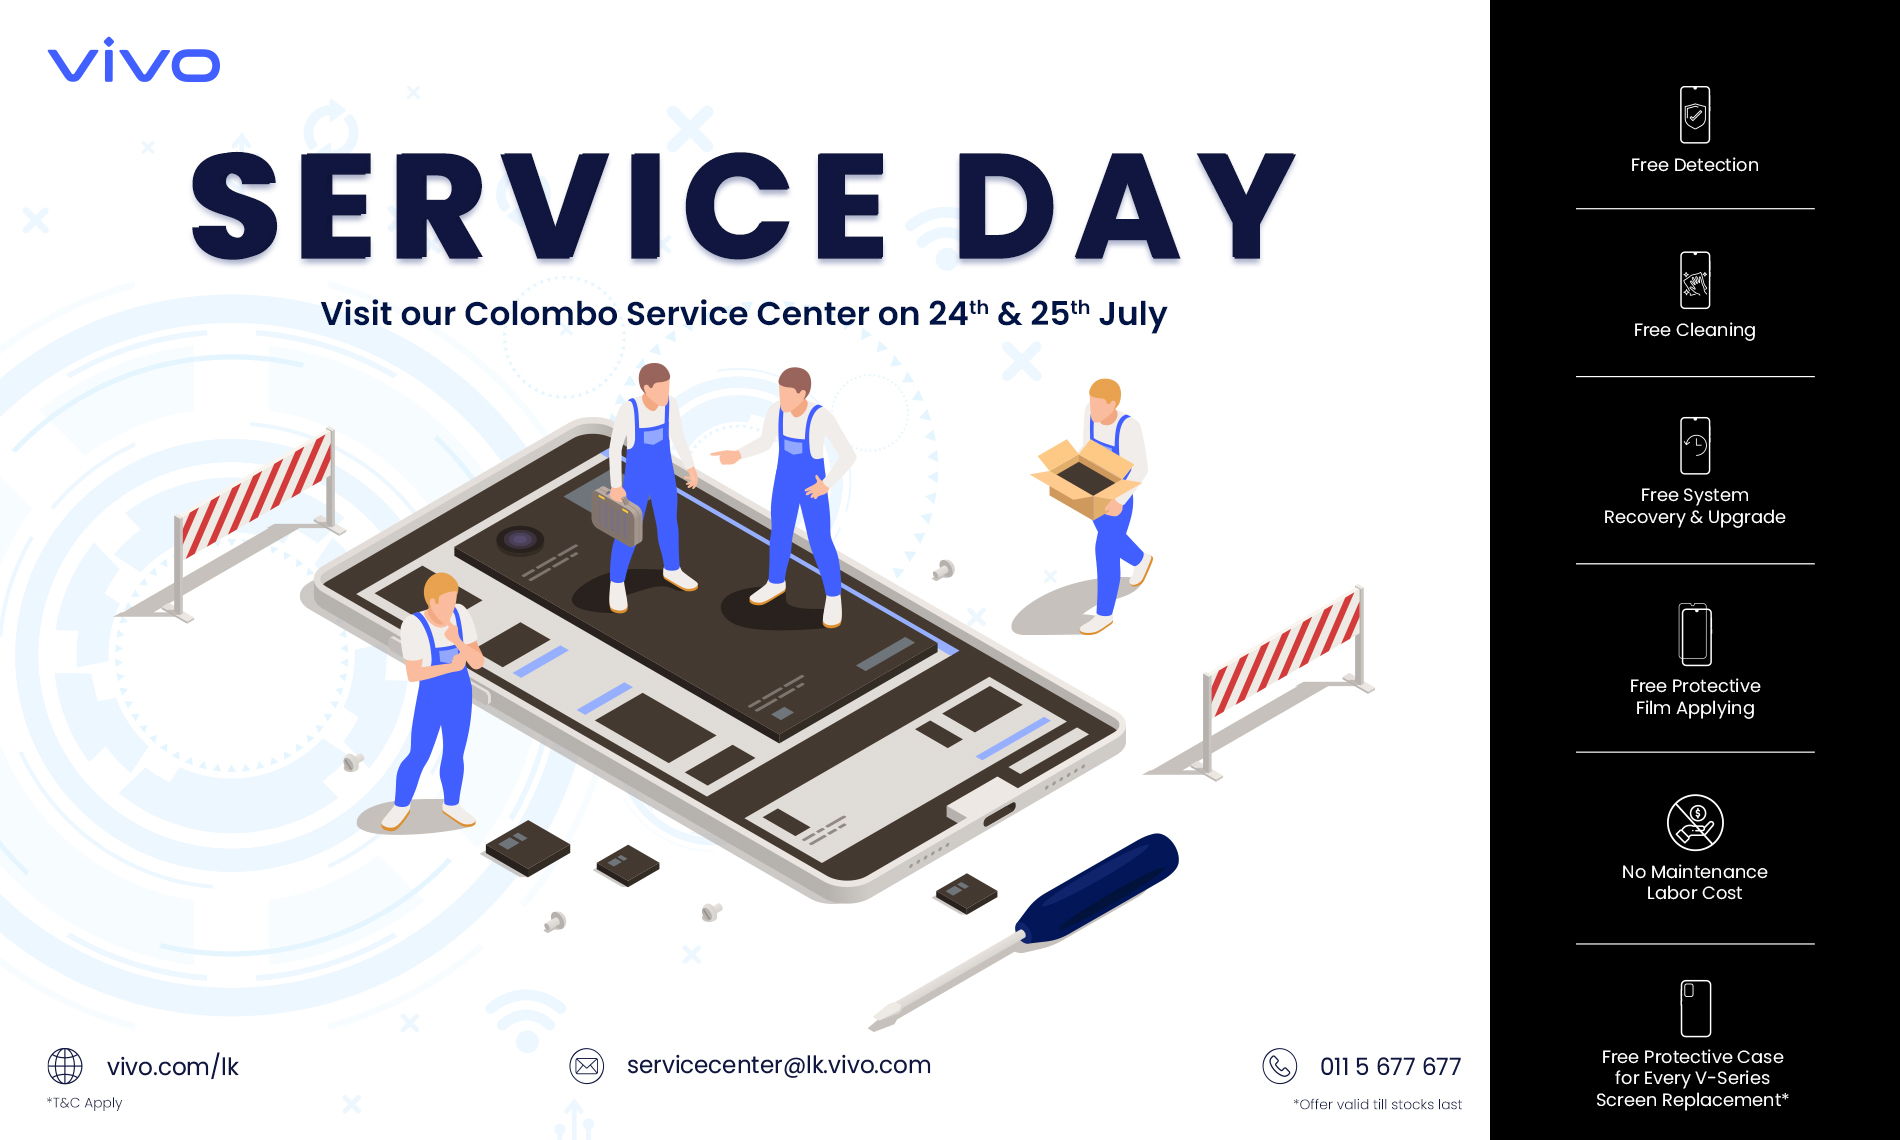 vivo Service Day Benefits in July